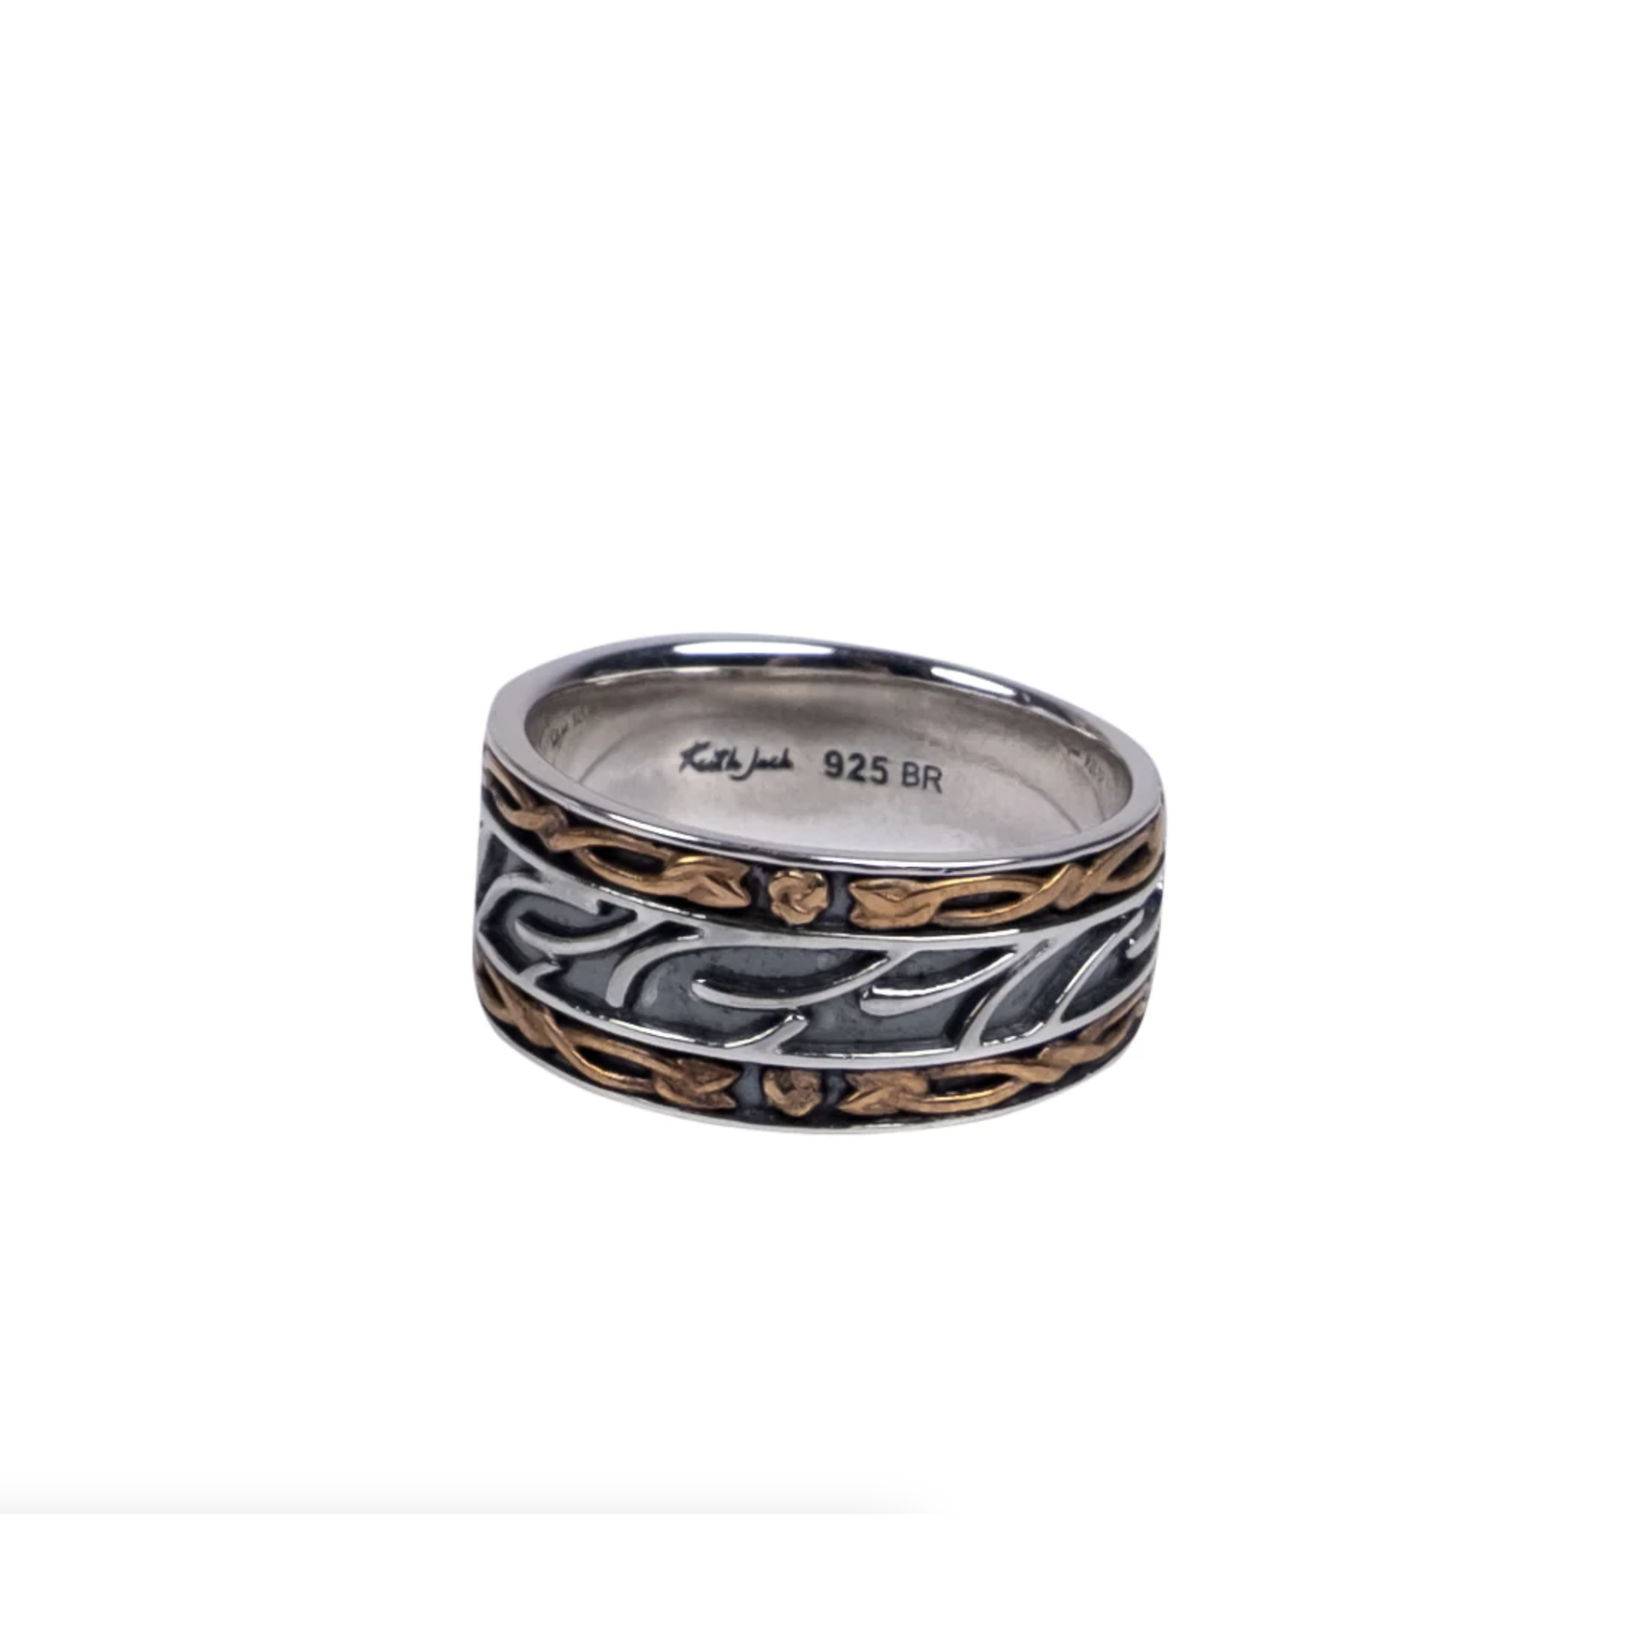 Keith Jack Silver and Bronze Cernunnos Ring